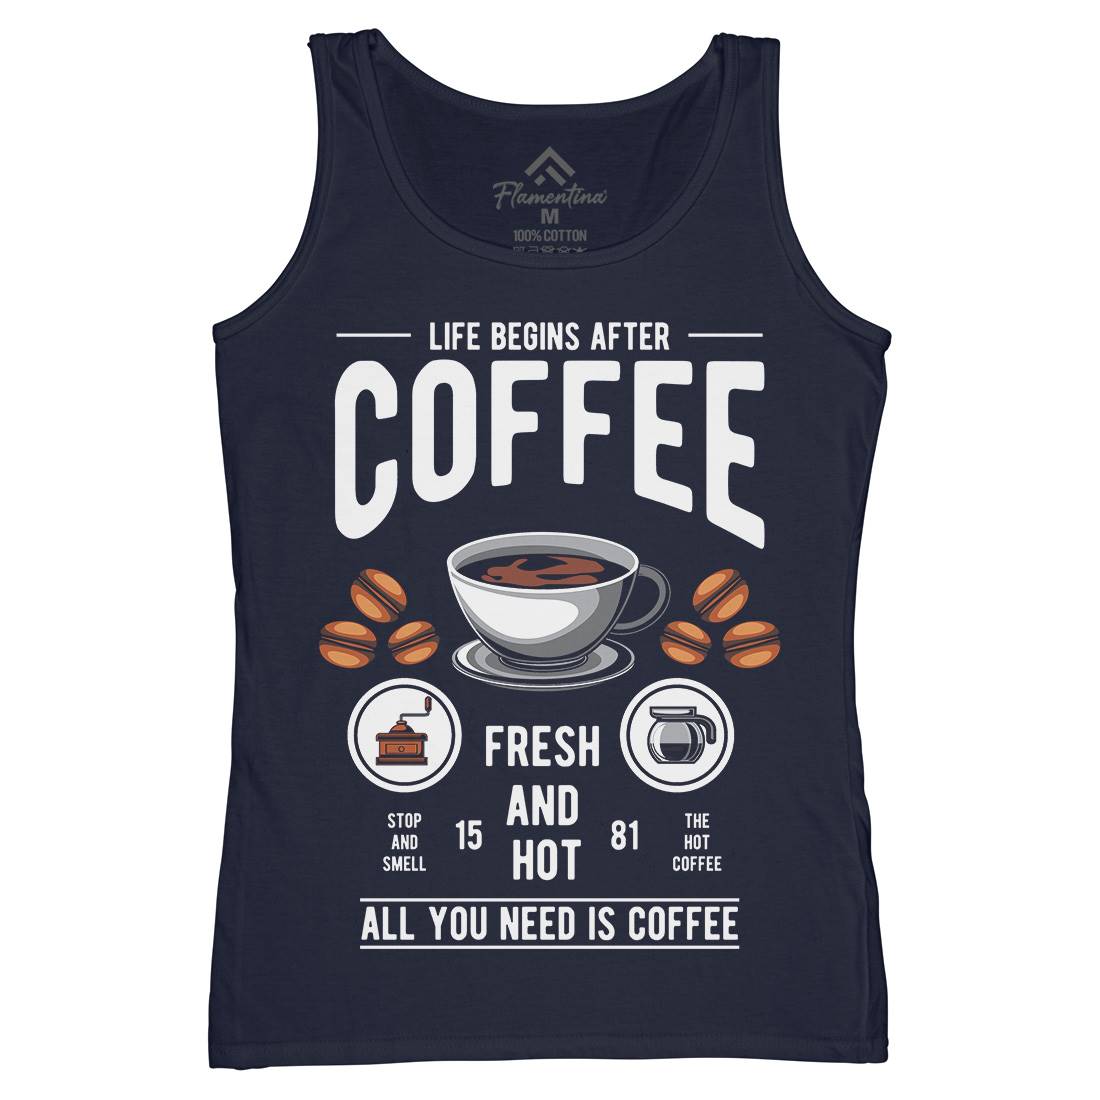 Life Begins After Coffee Womens Organic Tank Top Vest Drinks C386